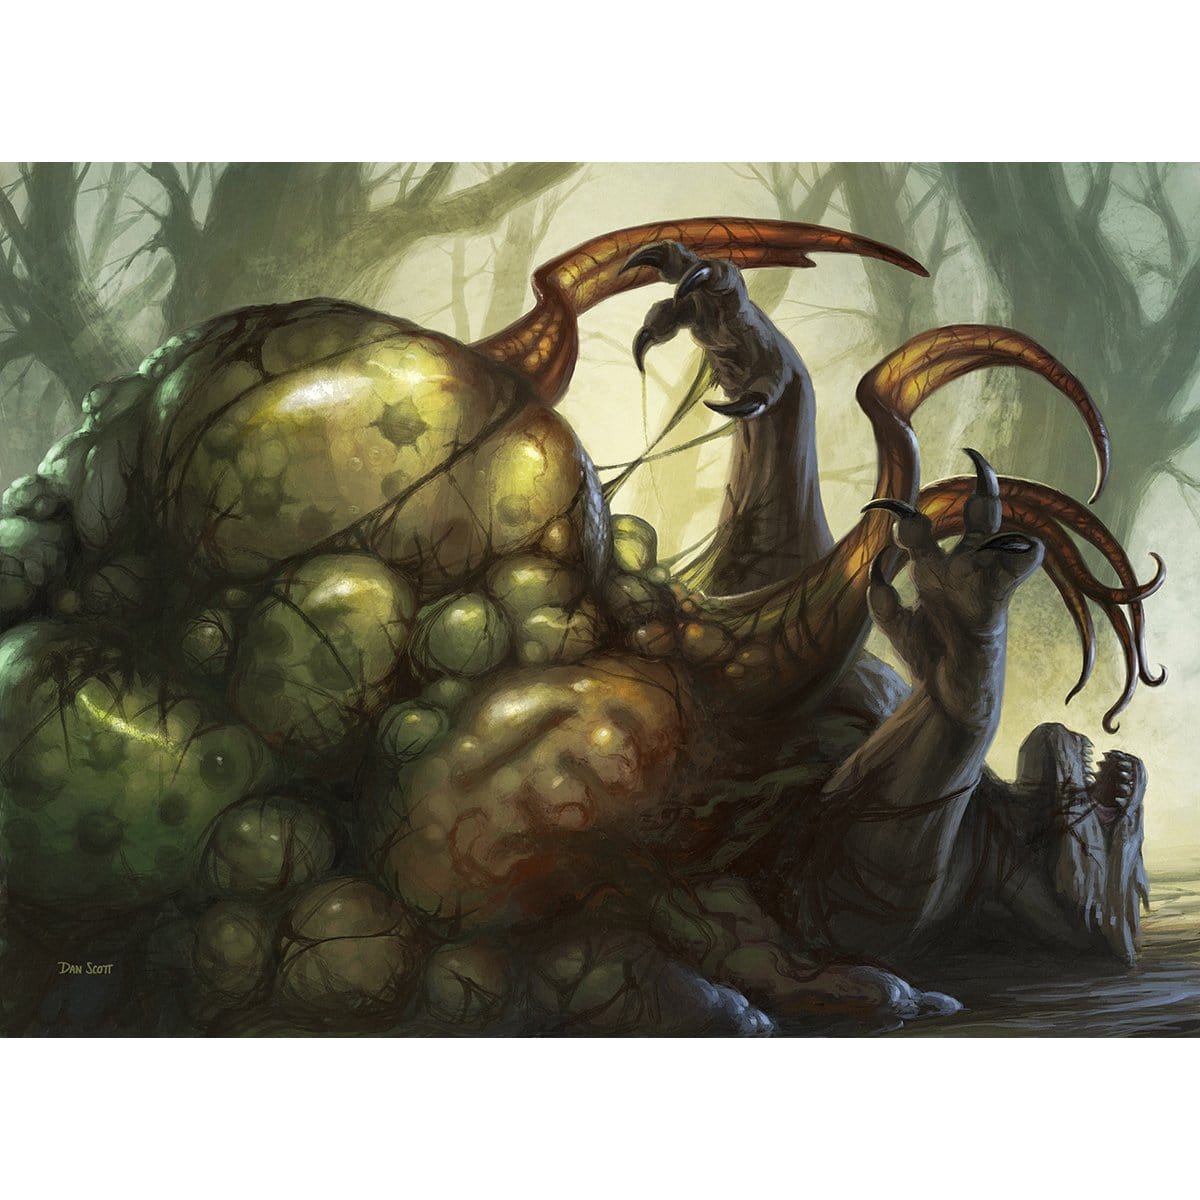 Scavenging Ooze Print - Print - Original Magic Art - Accessories for Magic the Gathering and other card games